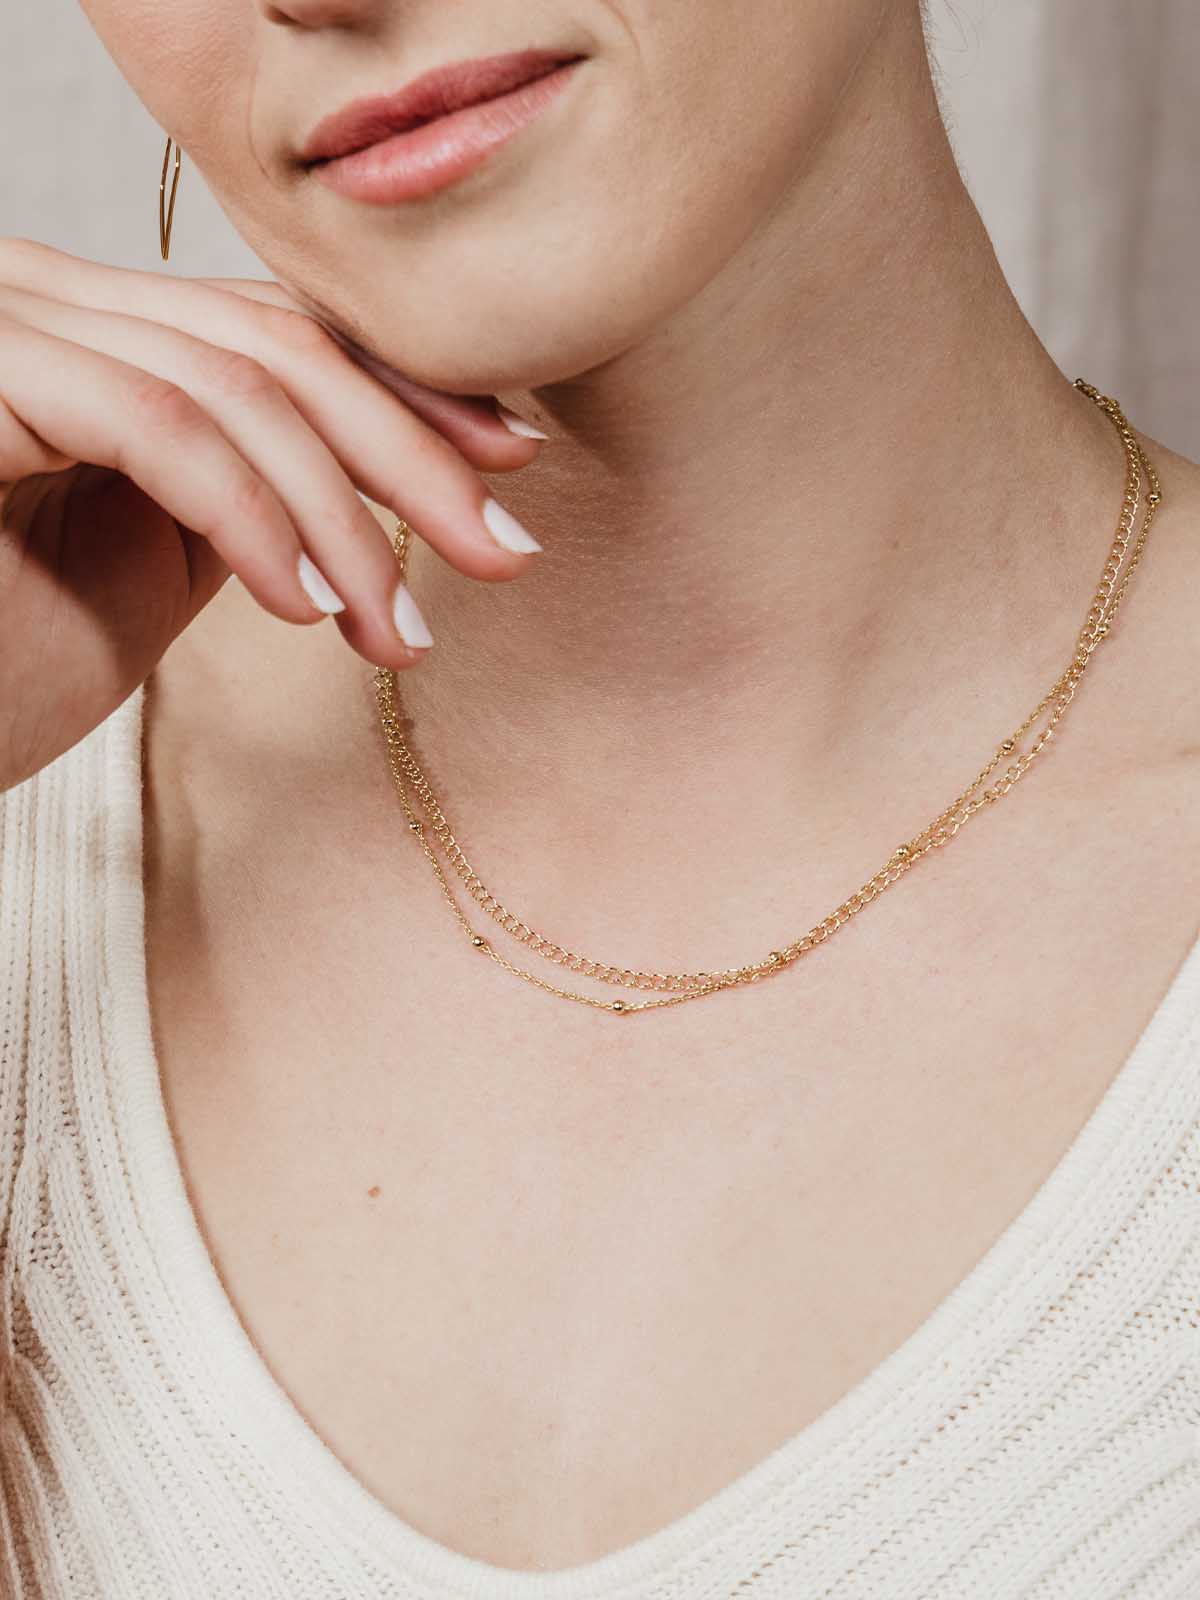 Gold double choker necklace on model with hand on chin